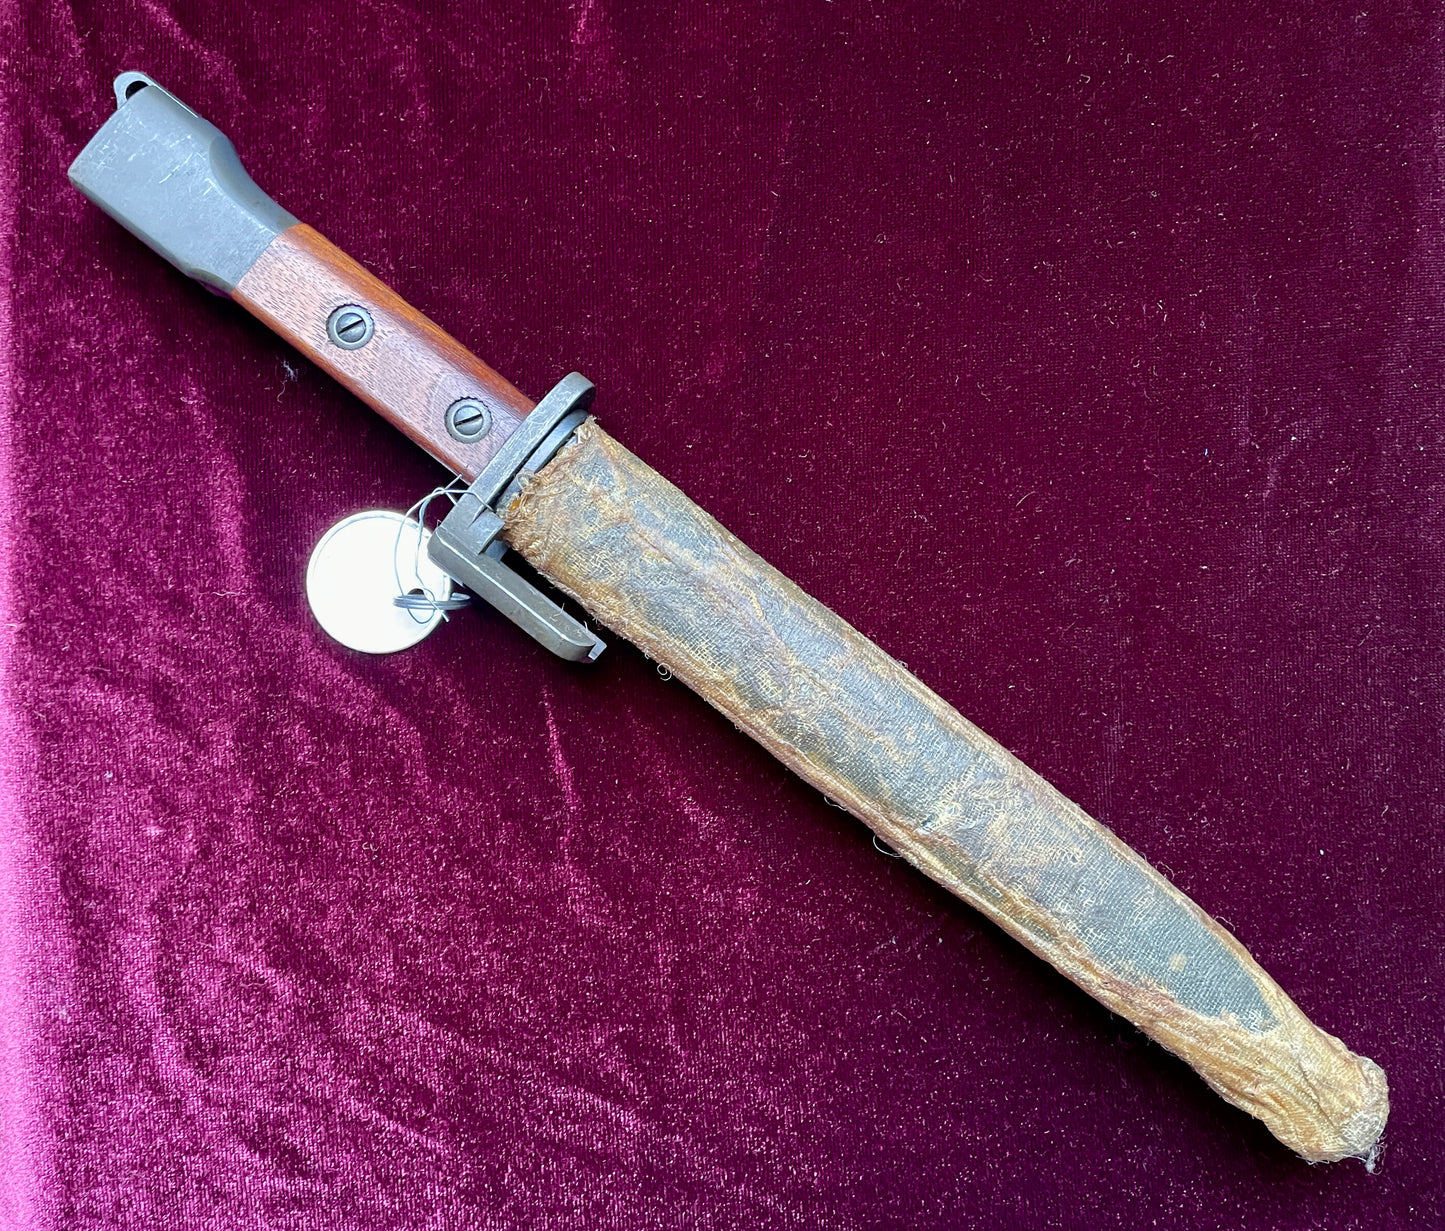 Belgium FN Type A bayonet with wood grips and flash hider prongs.